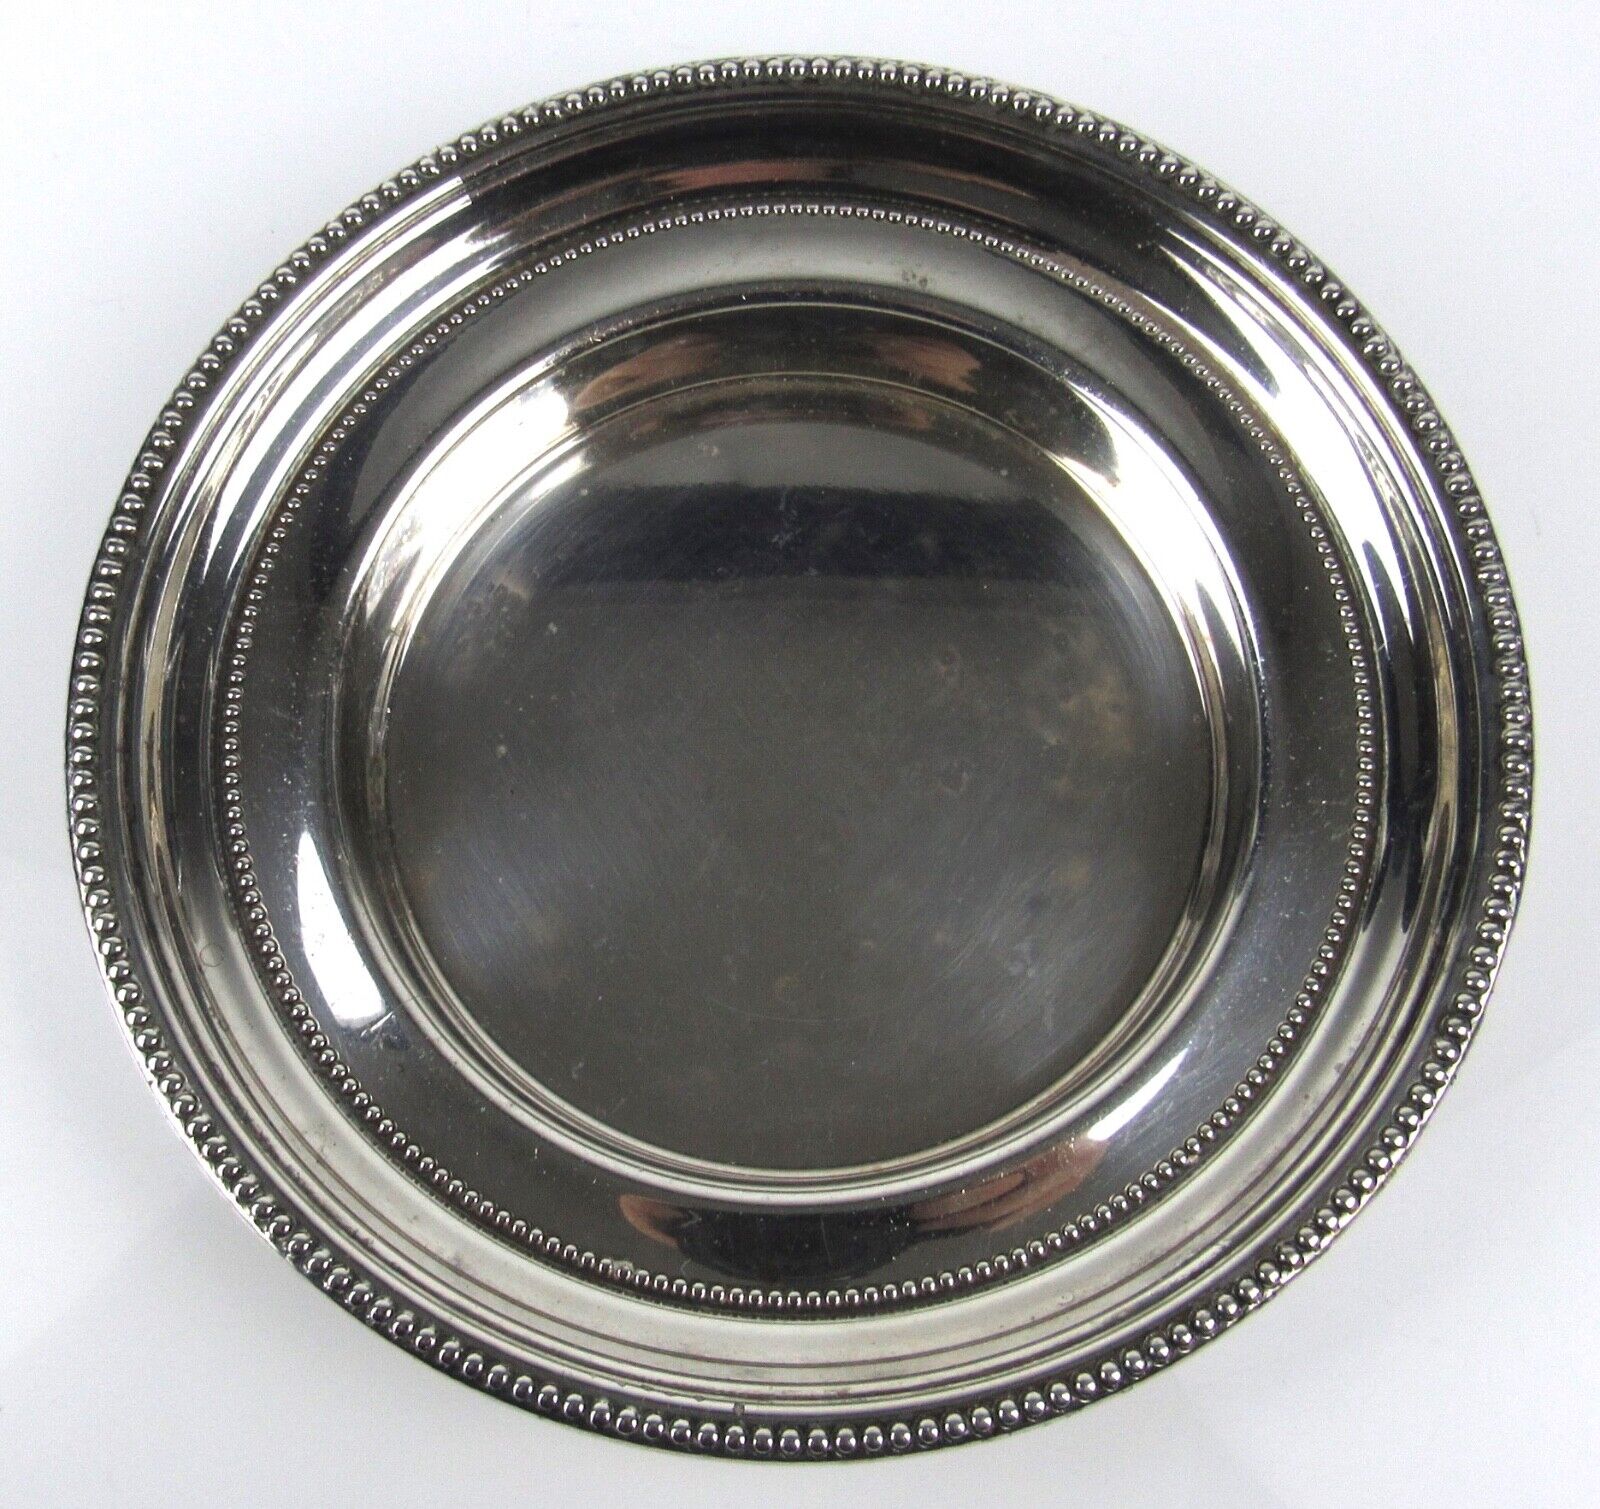 Vintage Towle Silver Plate Tray Dish or Ashtray